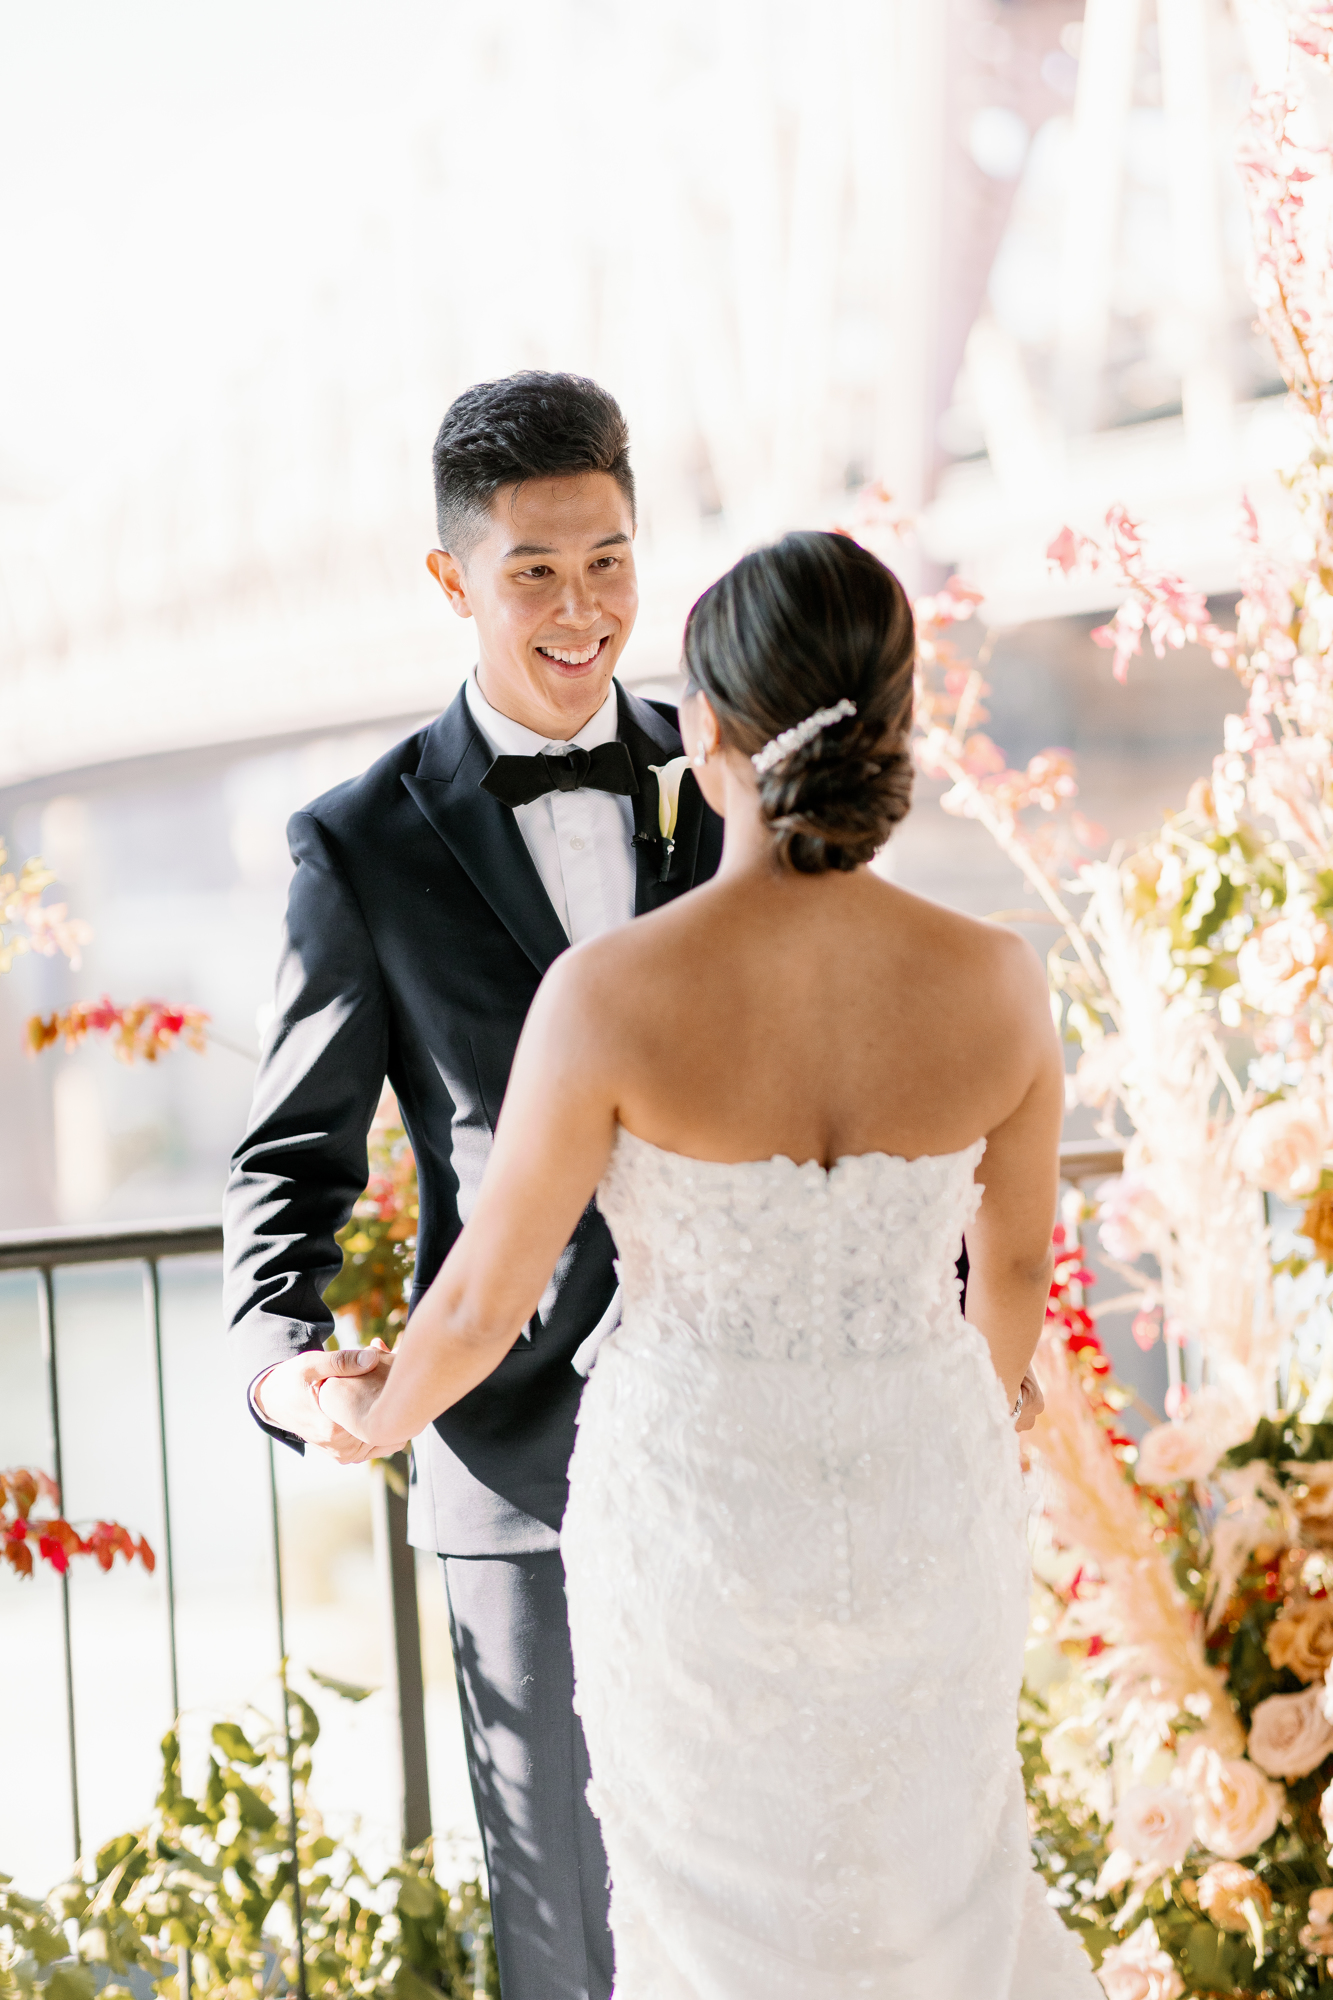 Ravel Hotel wedding in LIC with beautiful floral design